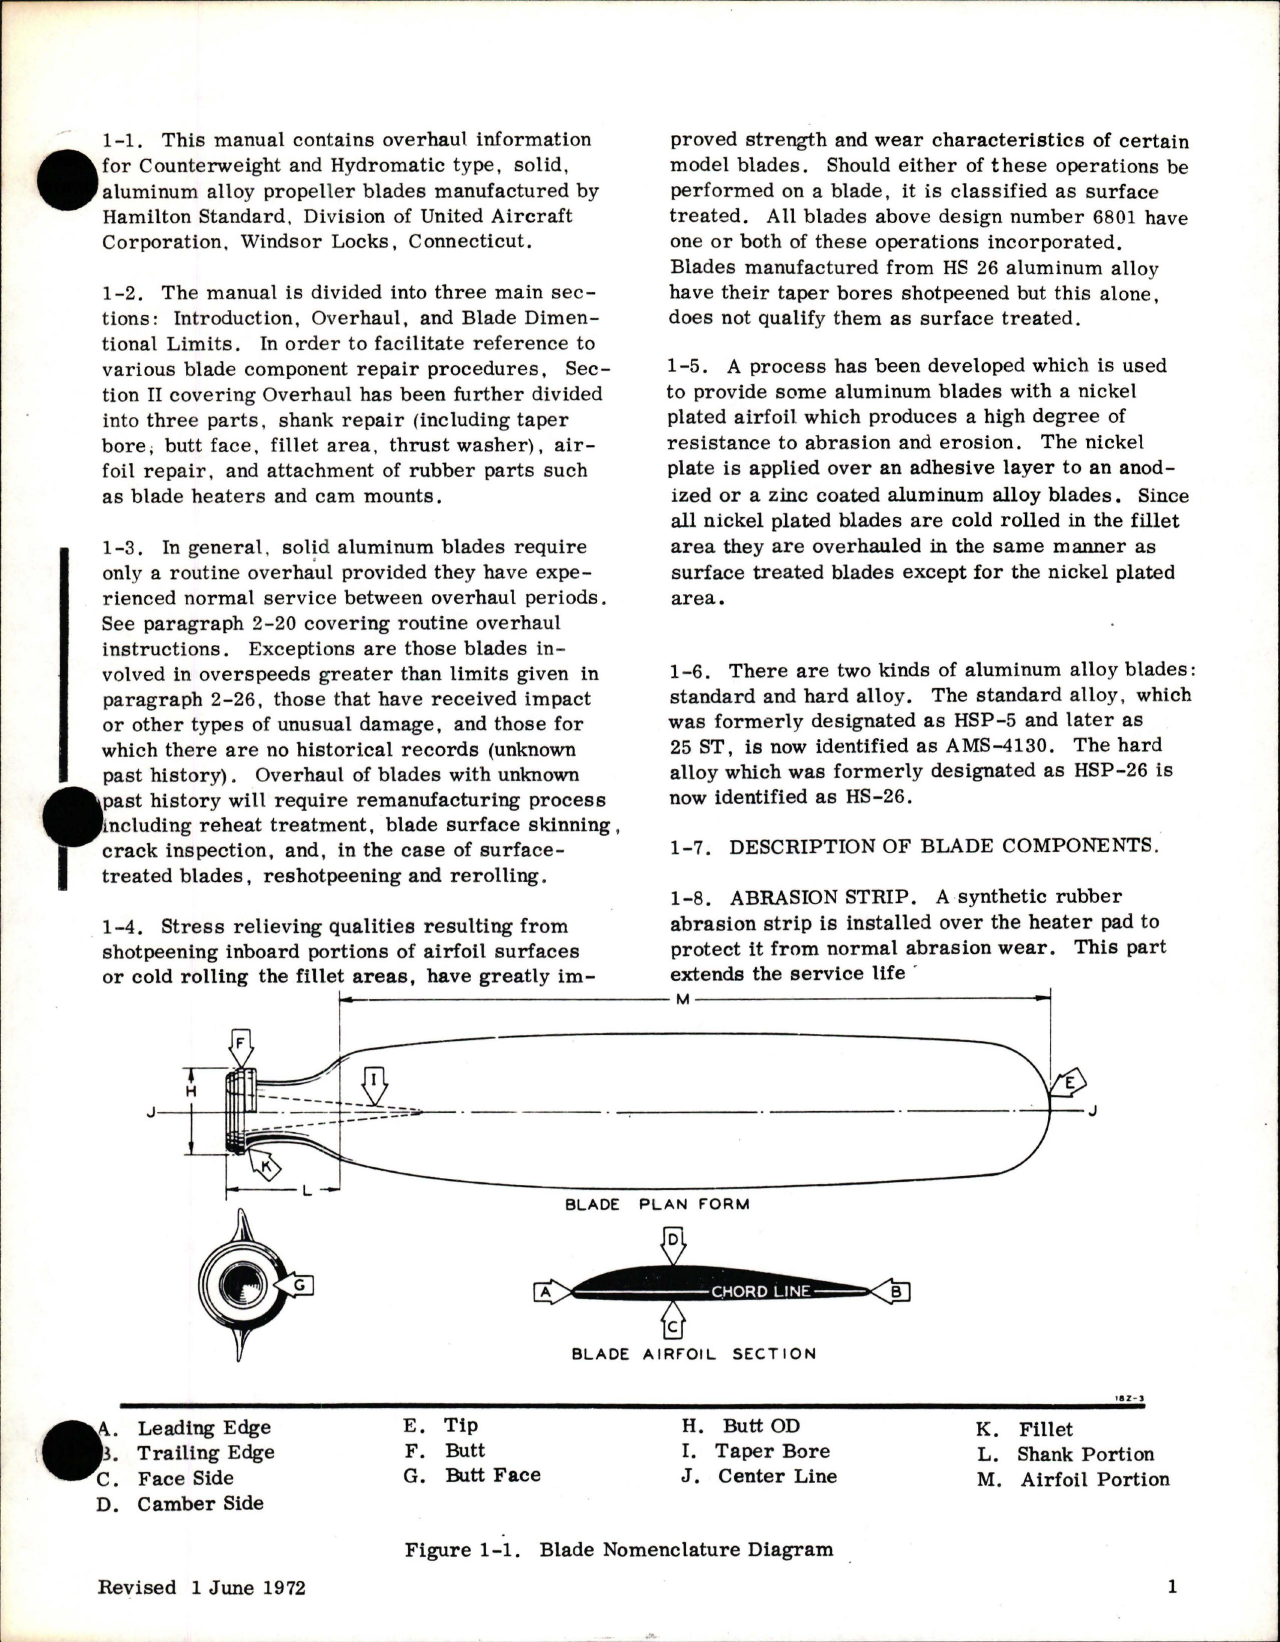 Sample page 7 from AirCorps Library document: Overhaul Manual for Aluminum Blade 